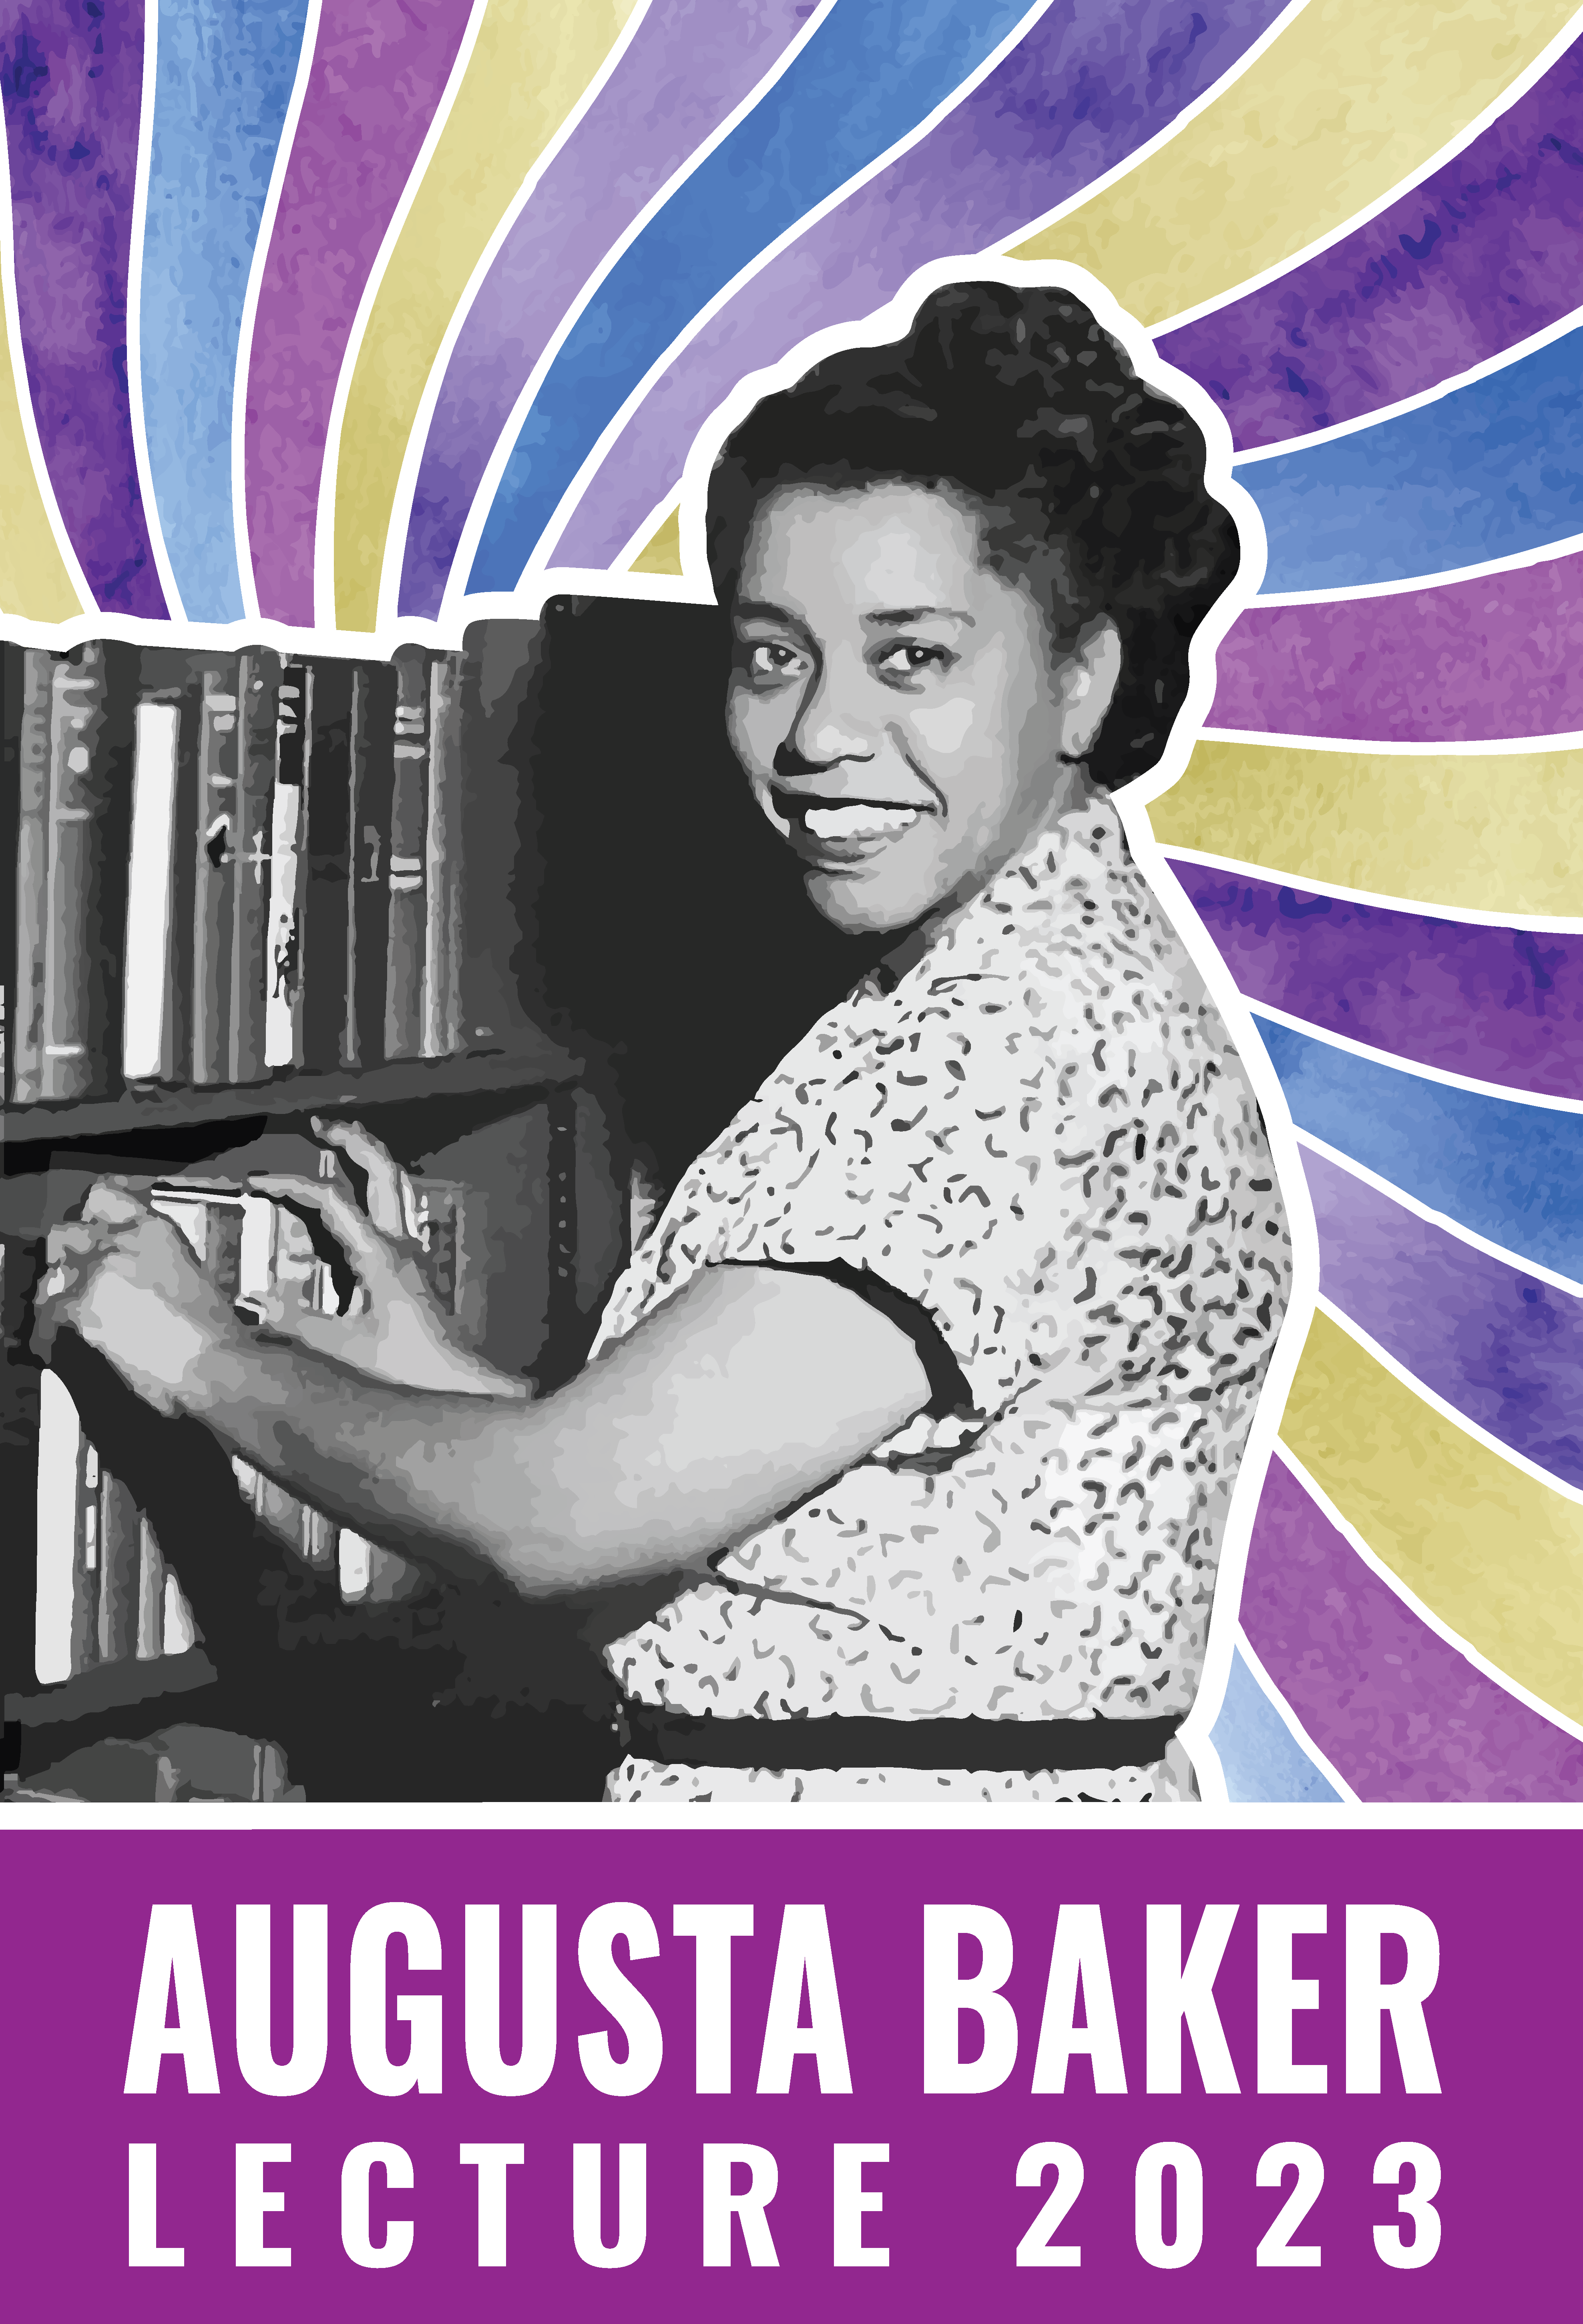 Photo of Augusta Baker | A Black female librarian.  Her back is turned but she is turning back to the camera smiling as she shelves books.  She is surrounded by blue and purple swirls.